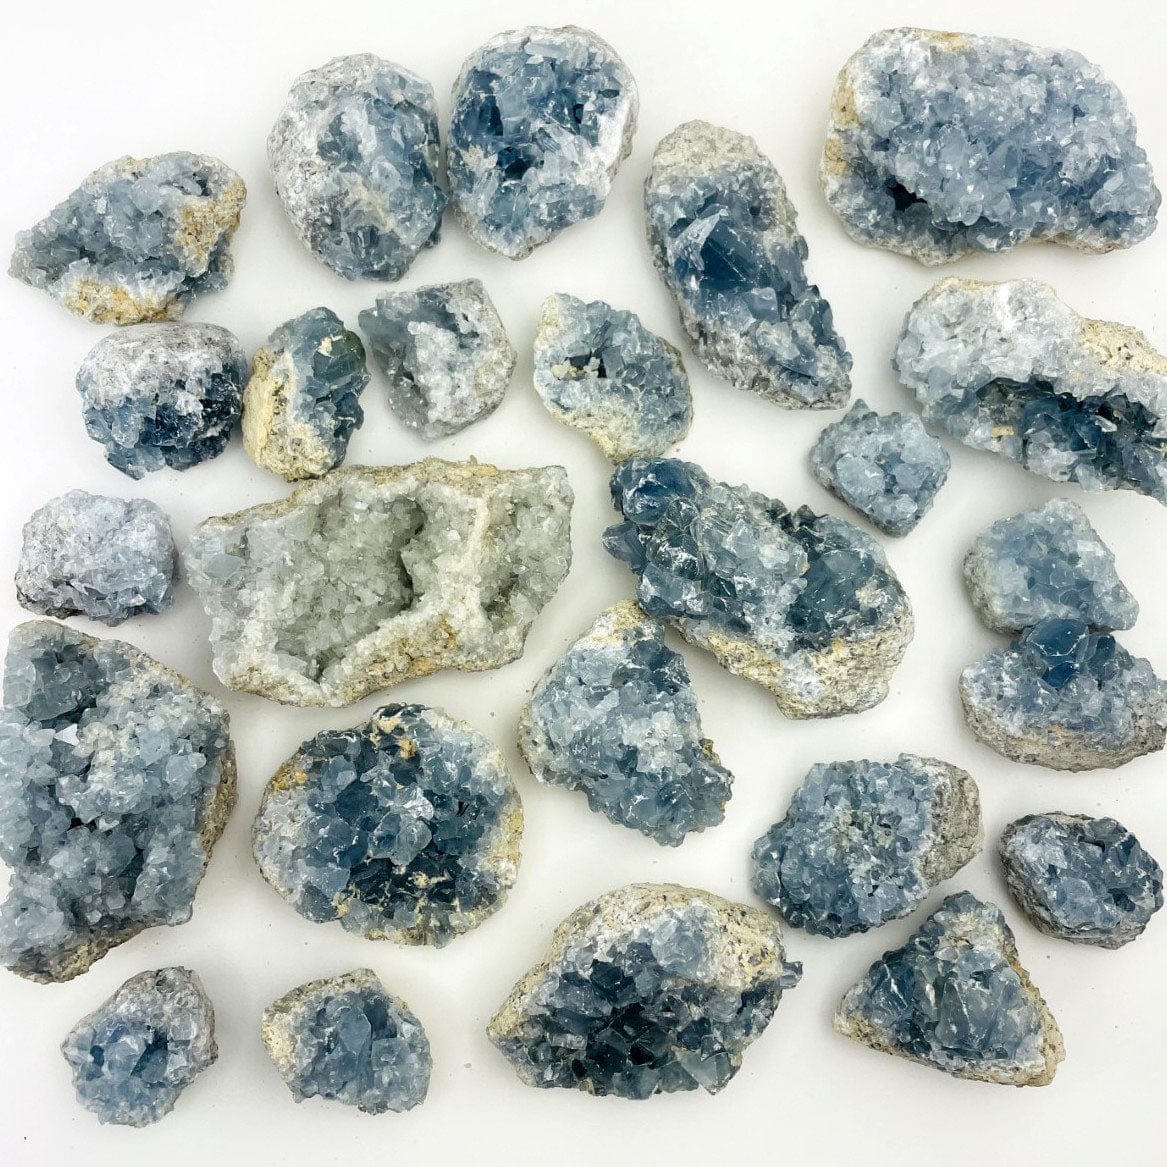 Celestite Crystals on a table in varying sizes